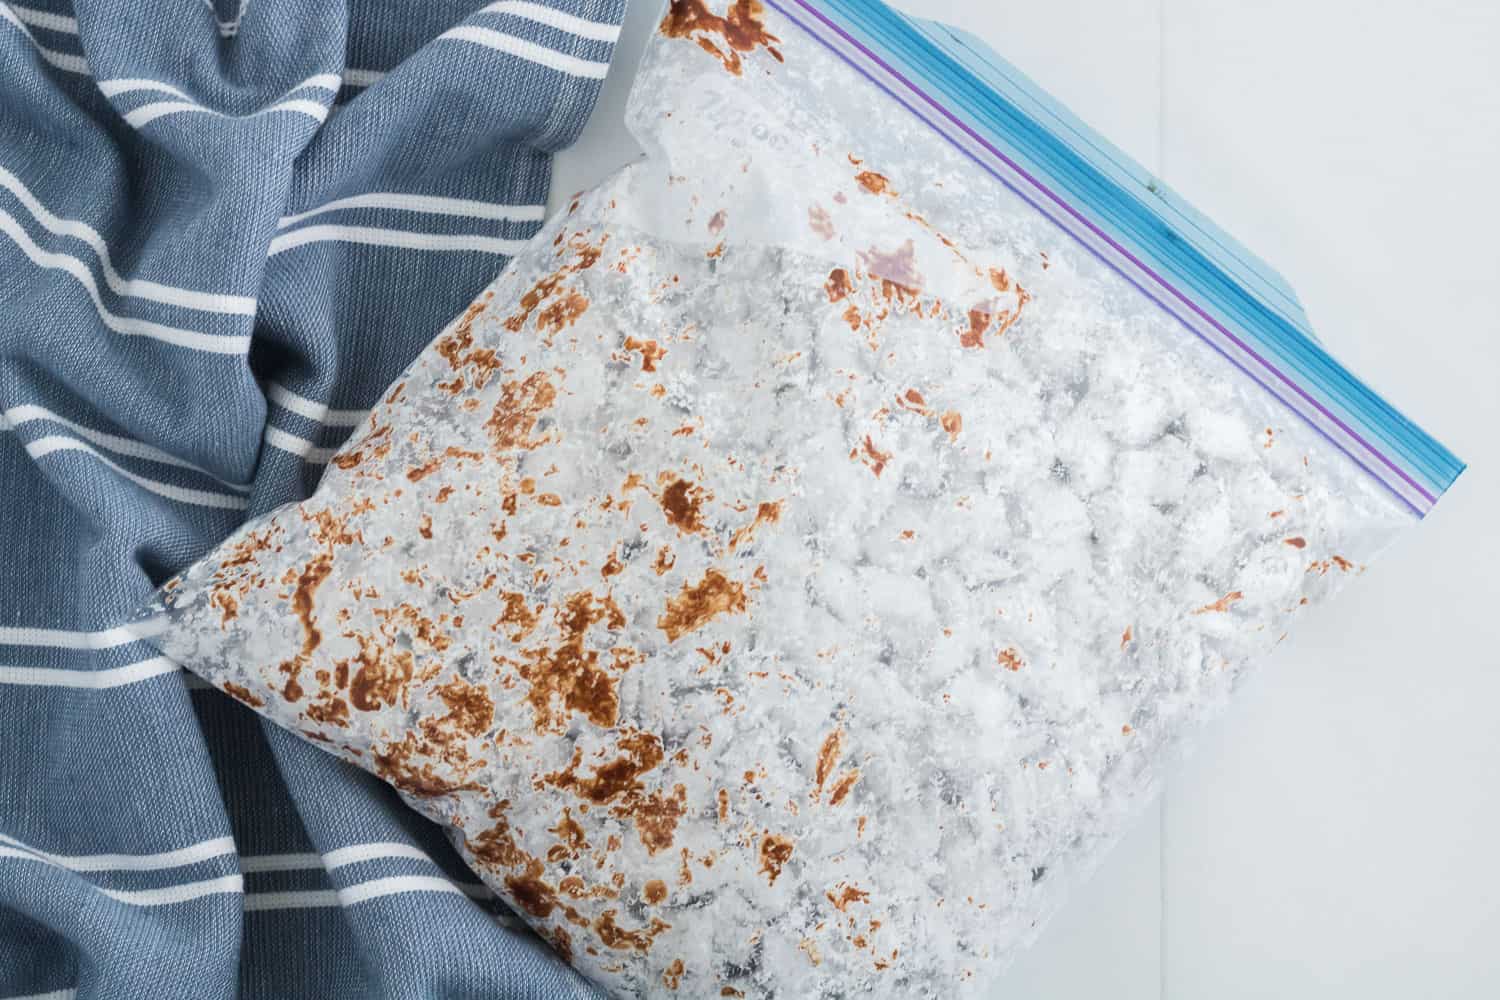 Puppy chow in a zip-top bag.